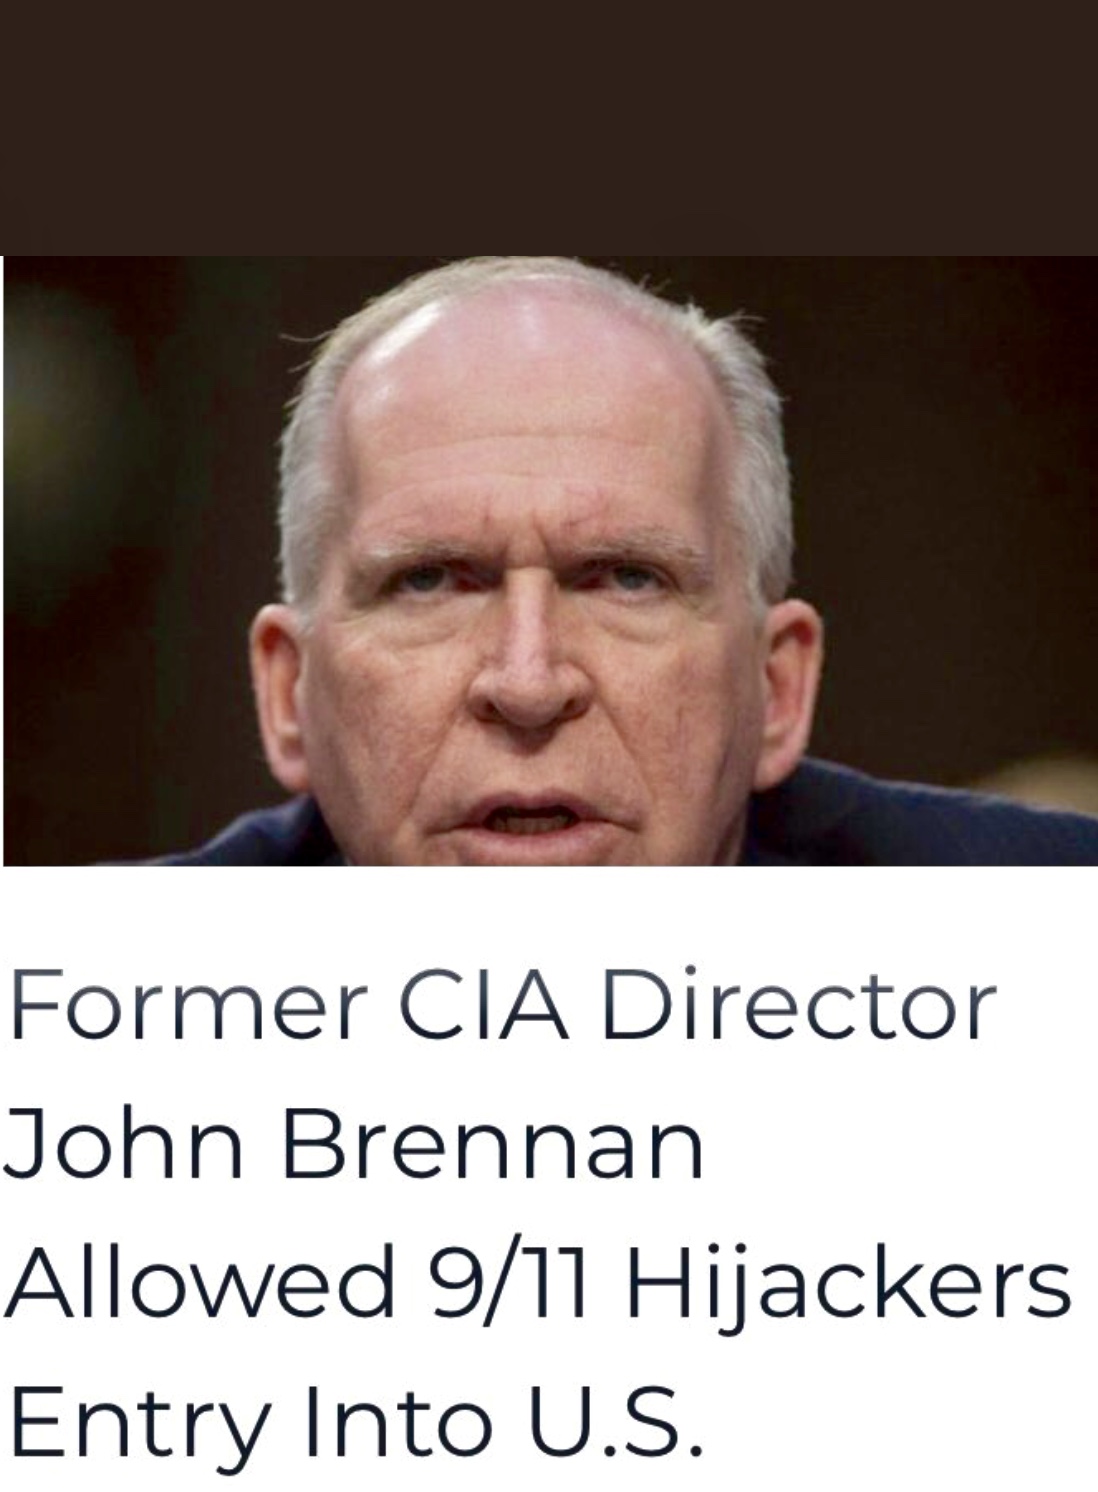 Former CIA director John Brennan green-lit the 9/11 hijackers entry into the US